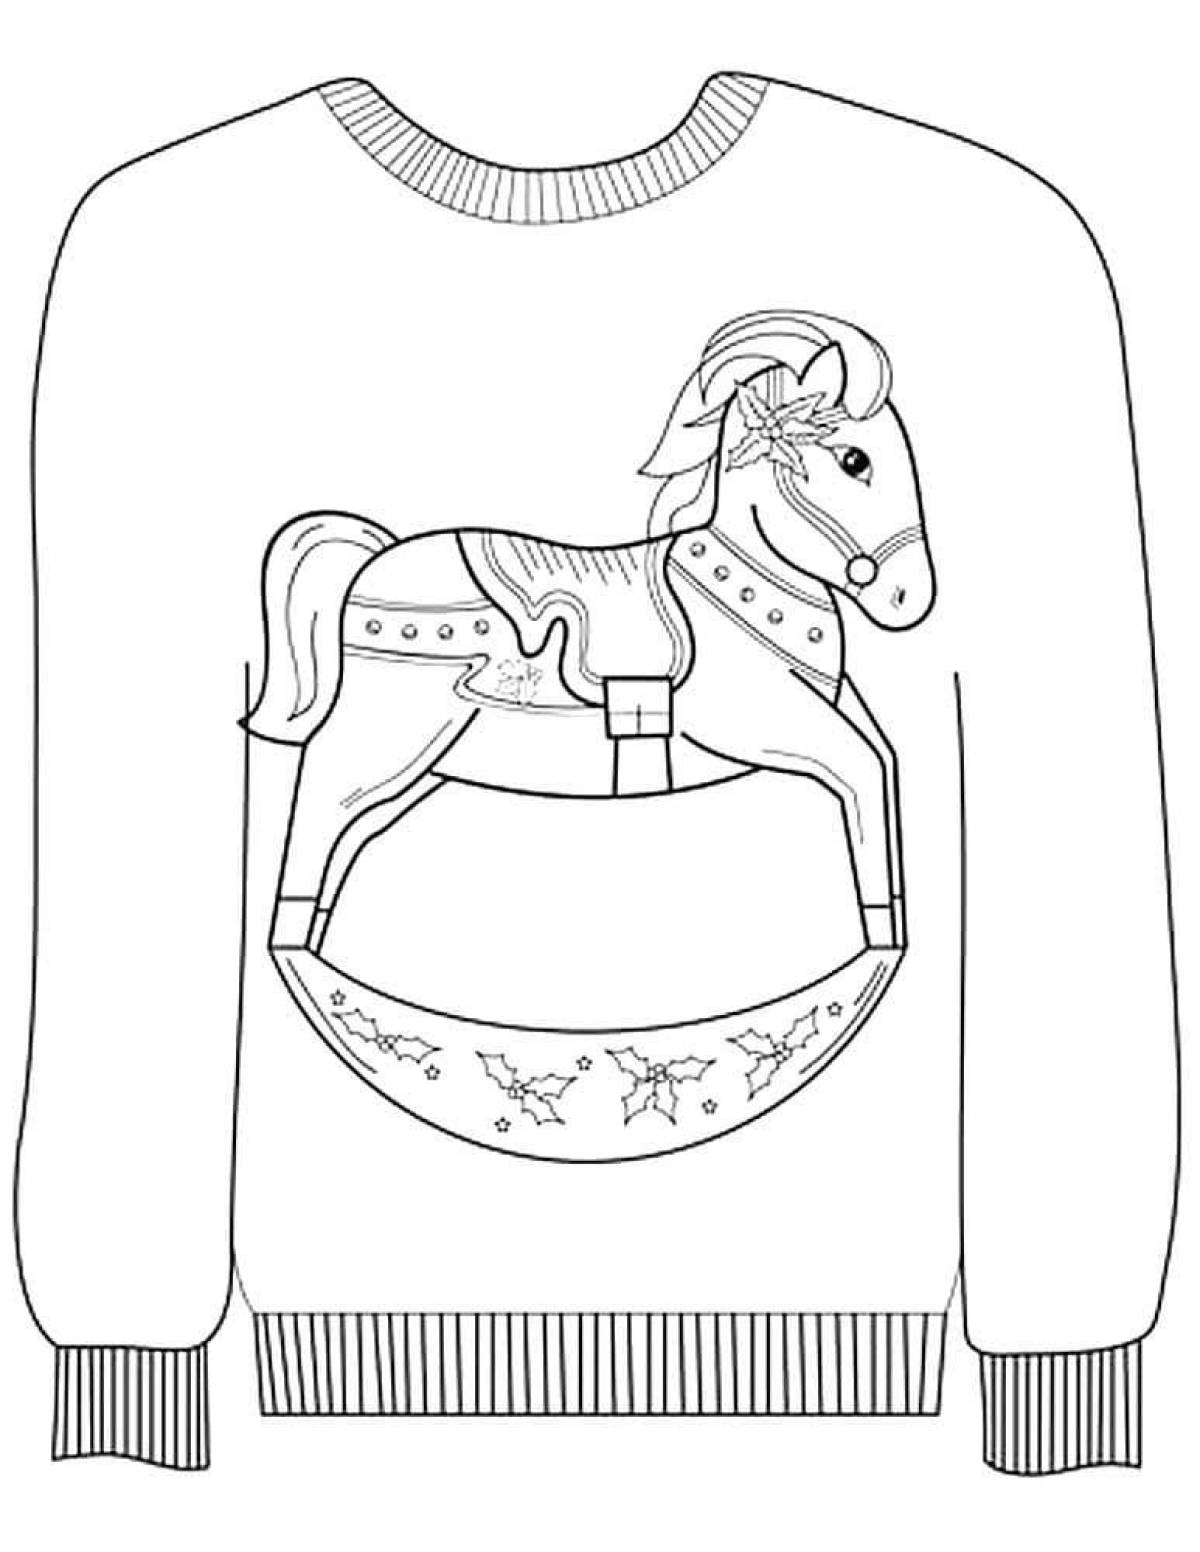 Festive sweater coloring page